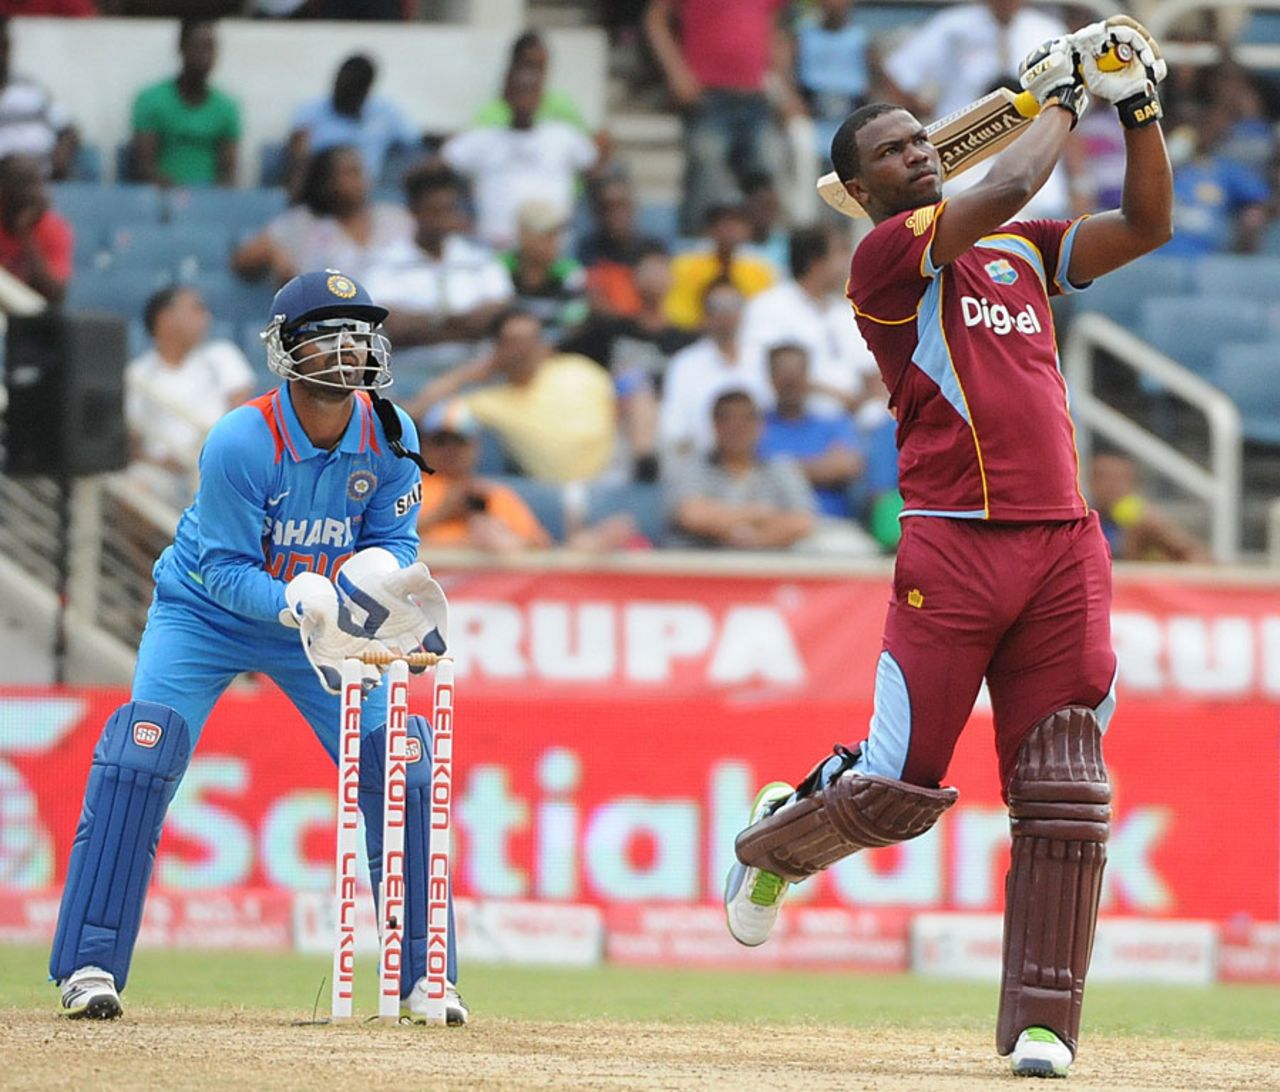 Johnson Charles goes over the top, West Indies v India, West Indies tri-series, Kingston, June 30, 2013